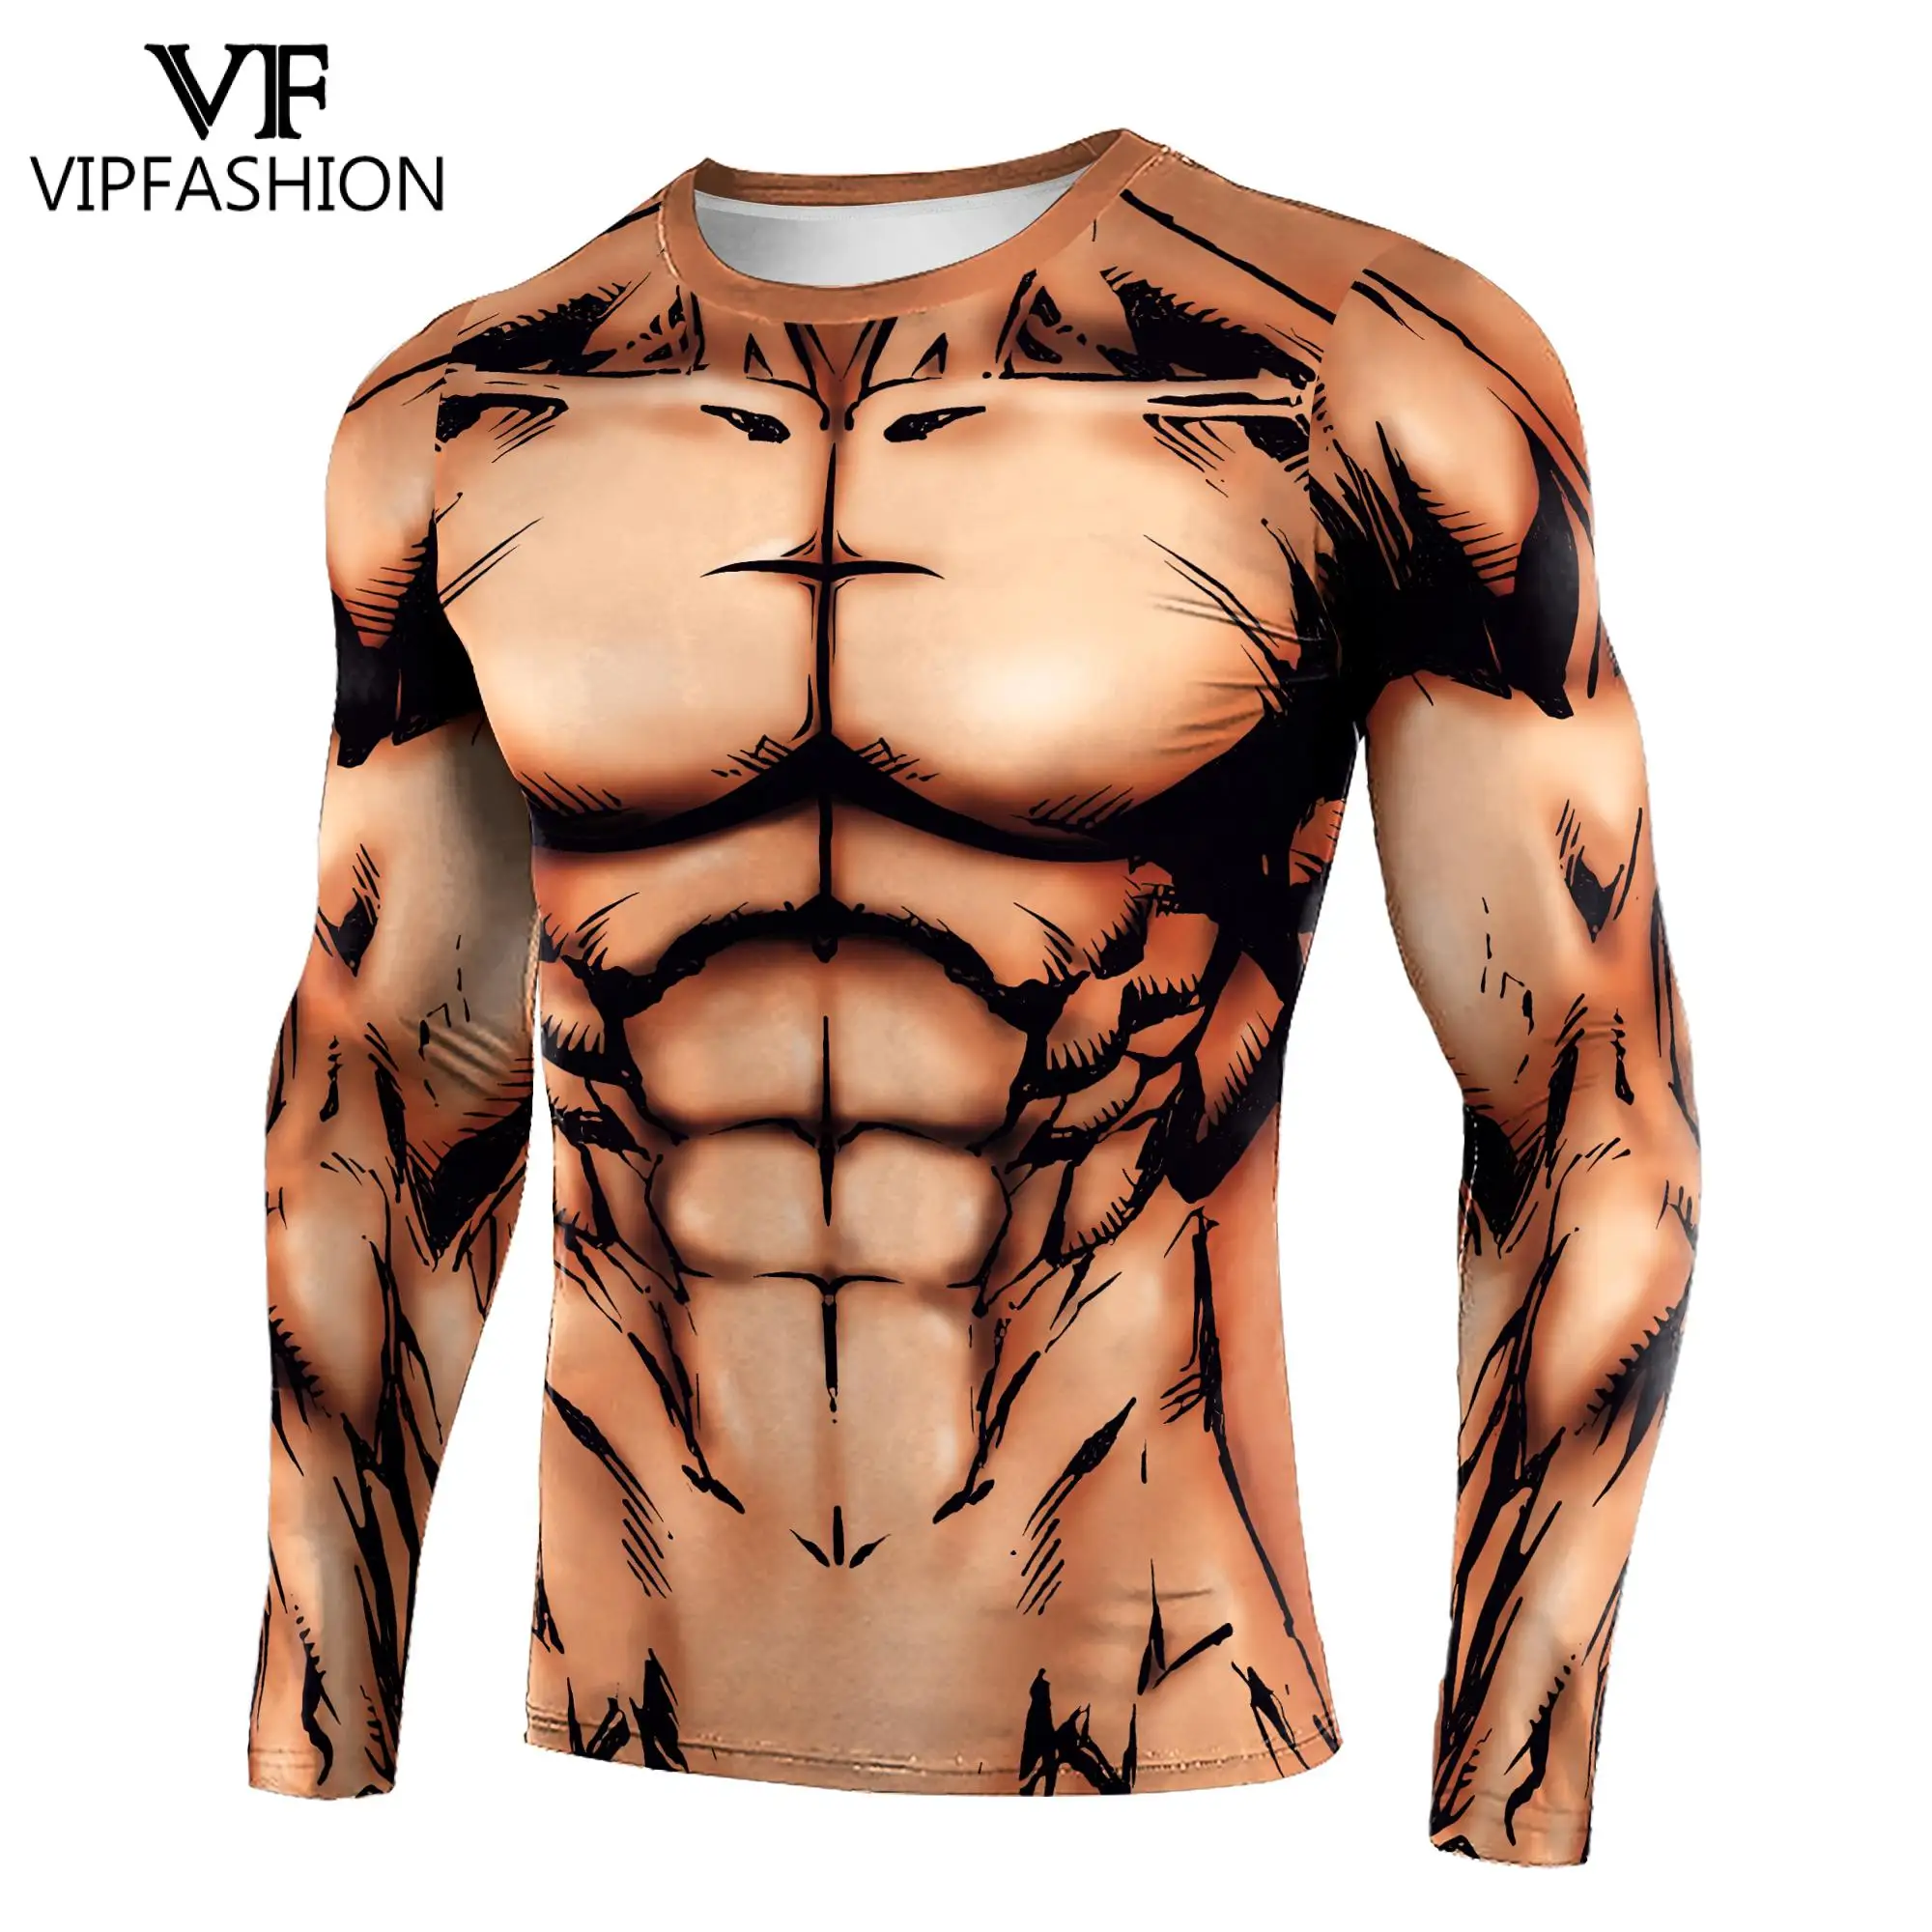 

VIP FASHION Long Sleeve Shirt Quick Drying Bodybuilding Workout Top Compression Running T-shirt Men Muscle Print Tee Clothing